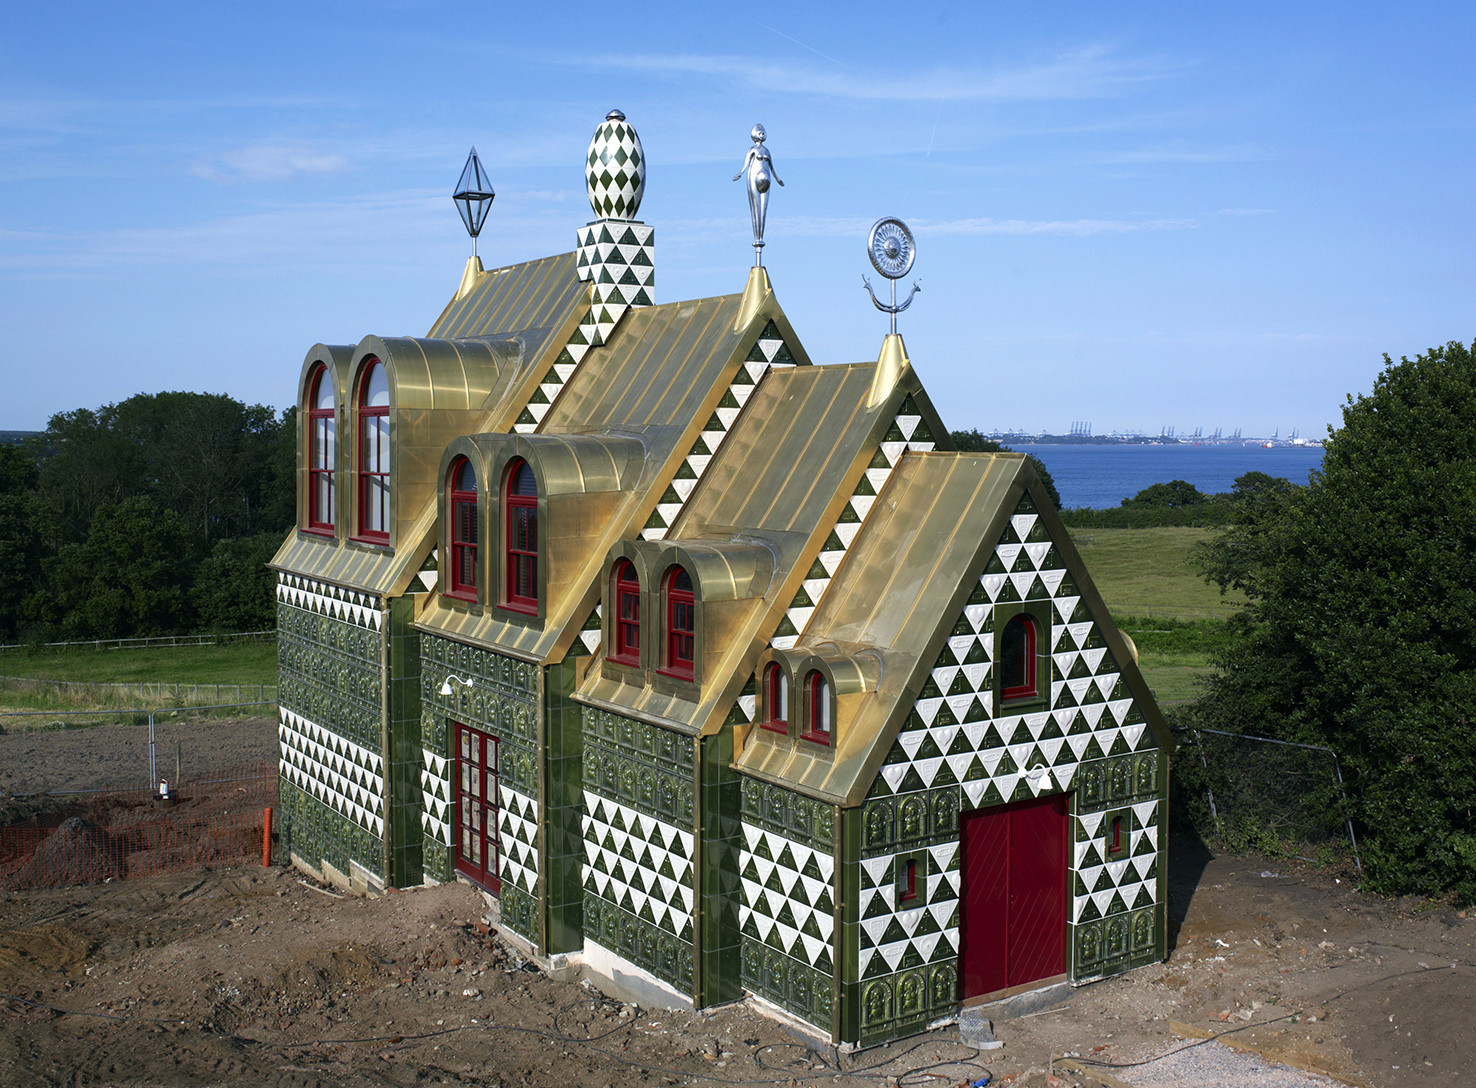 A House for Essex / FAT & Grayson Perry